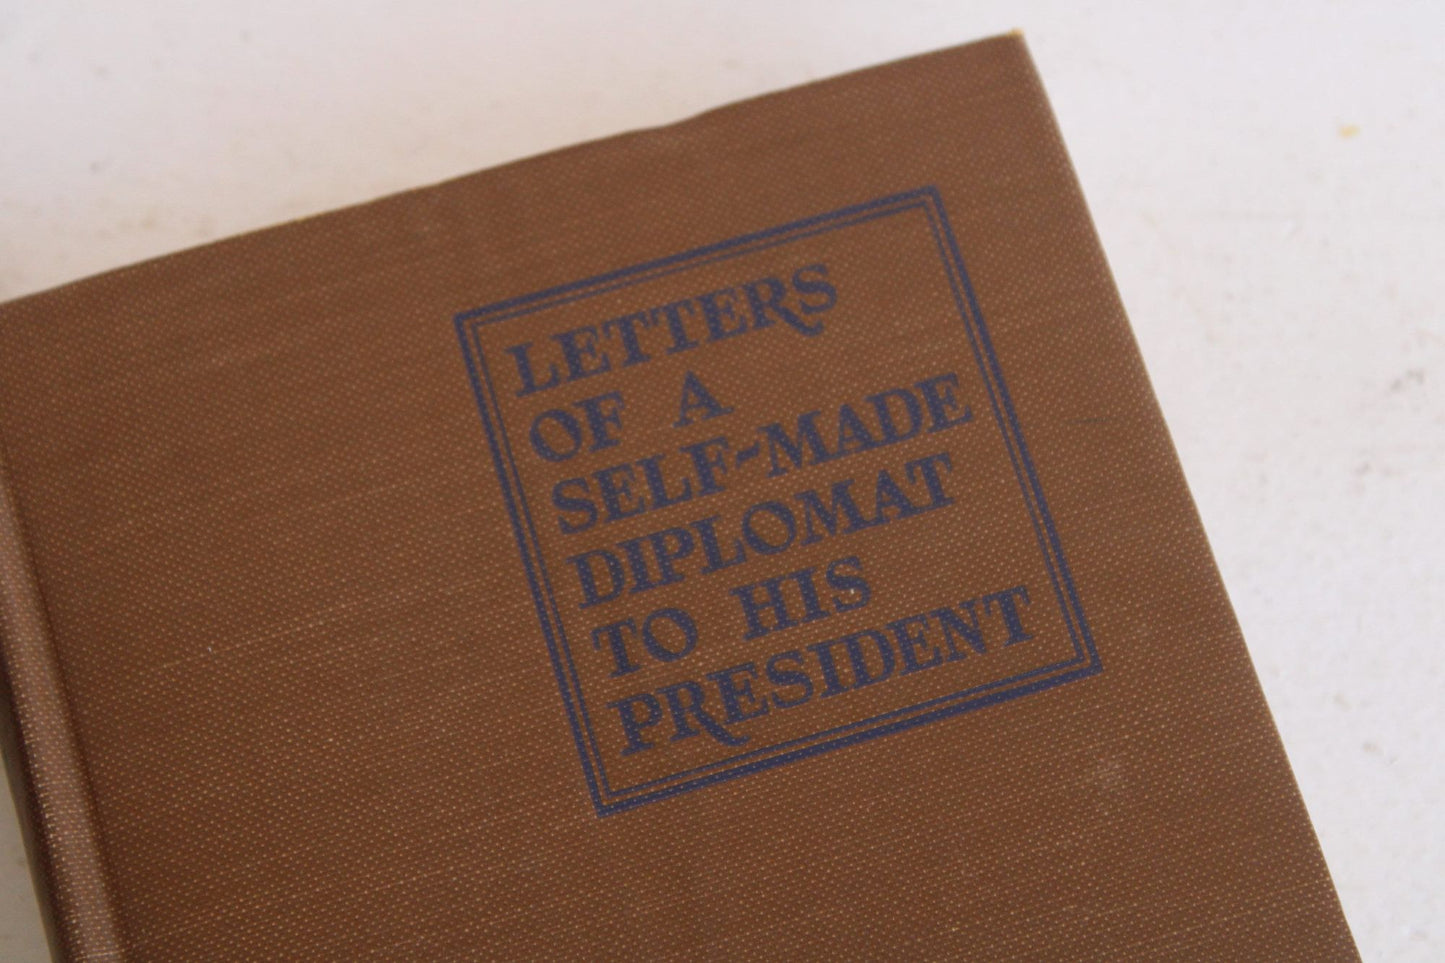 Vintage 1920s Book, Will Rogers, "Letters Of a Self Made Diplomat to His President"